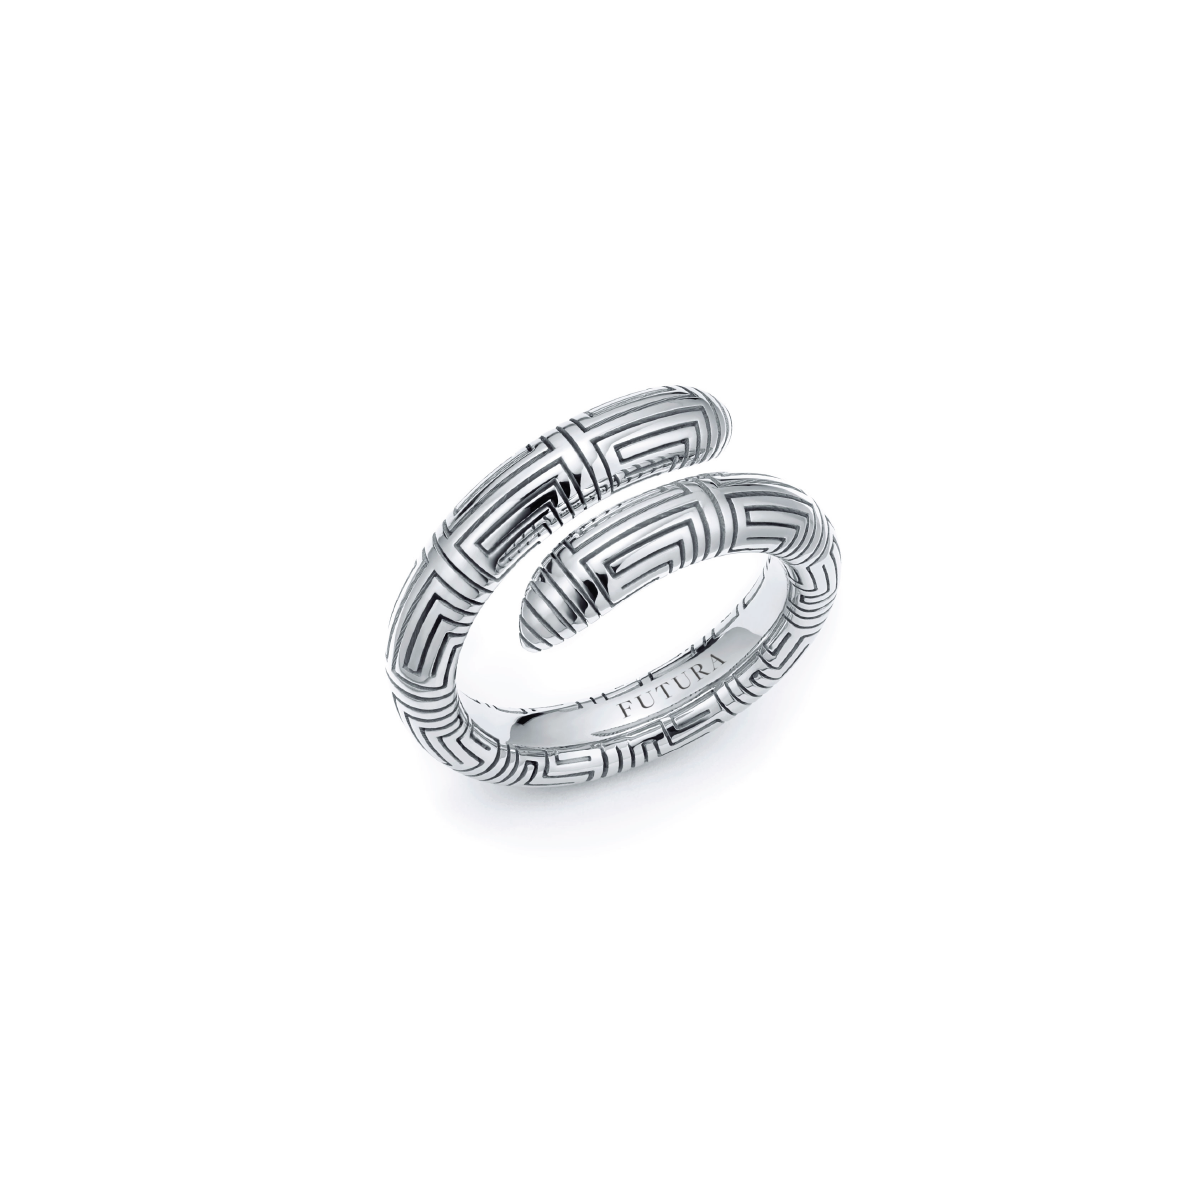 Ethical White Gold Ring - 800 BC Ring by FUTURA Jewelry